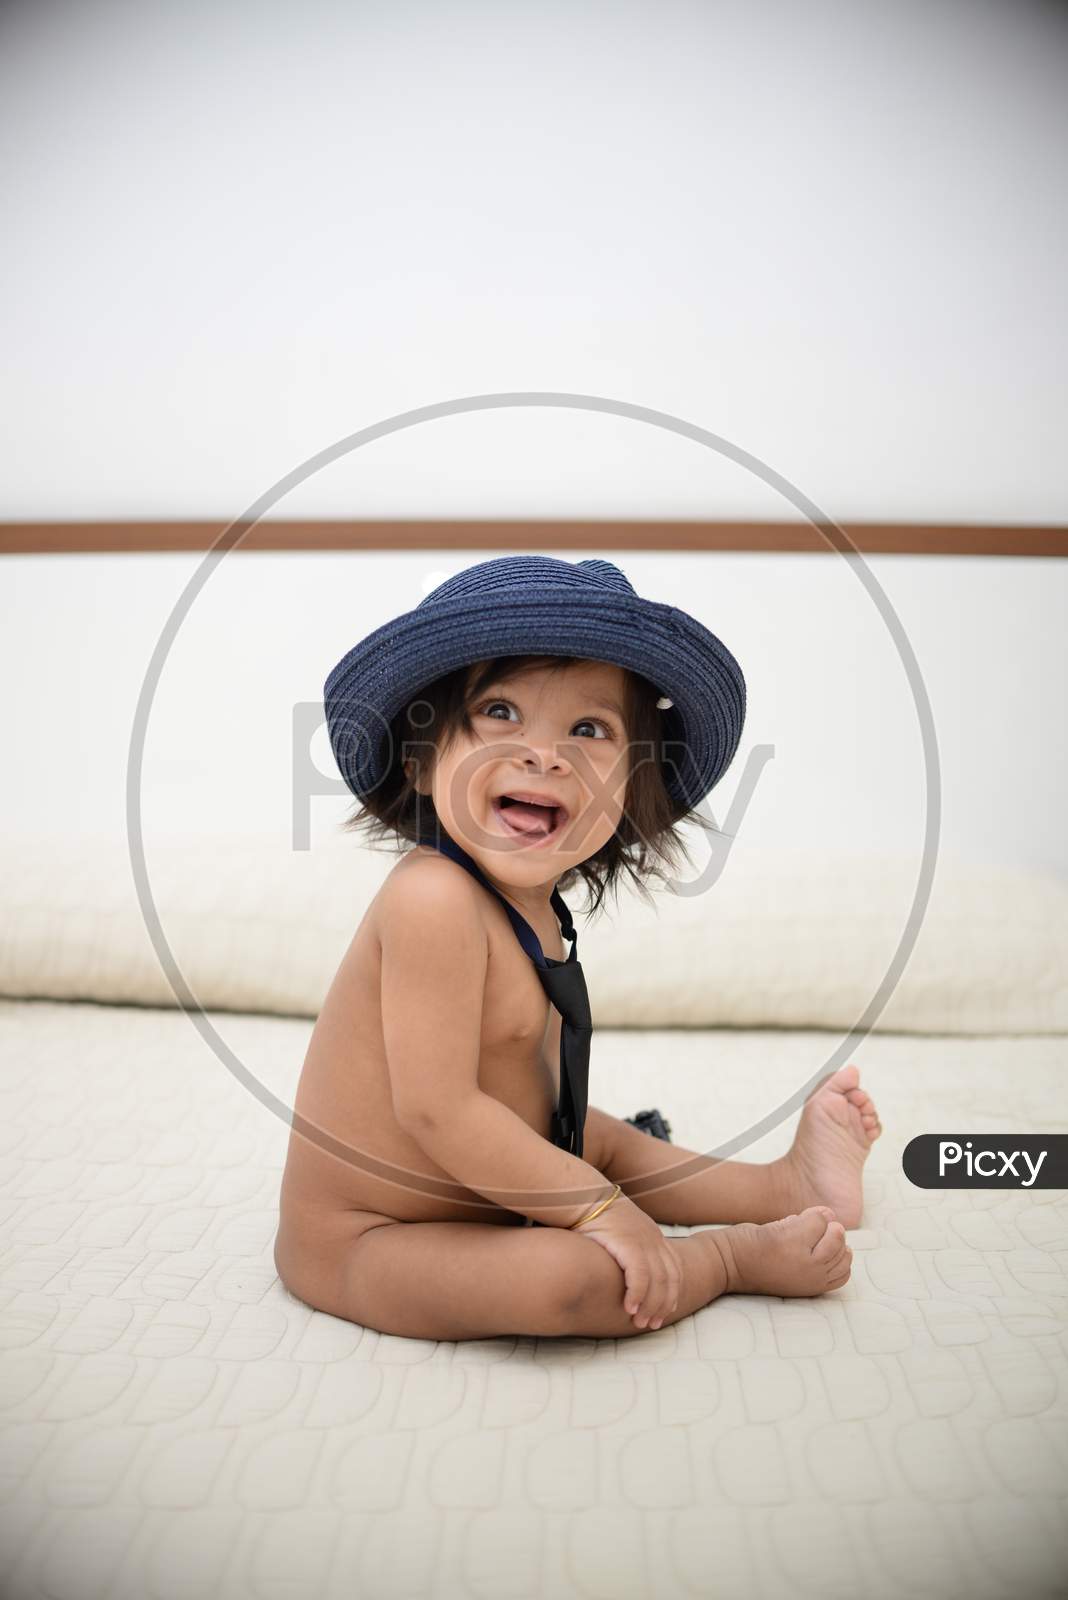 Baby smiling, wearing a hat and a tie